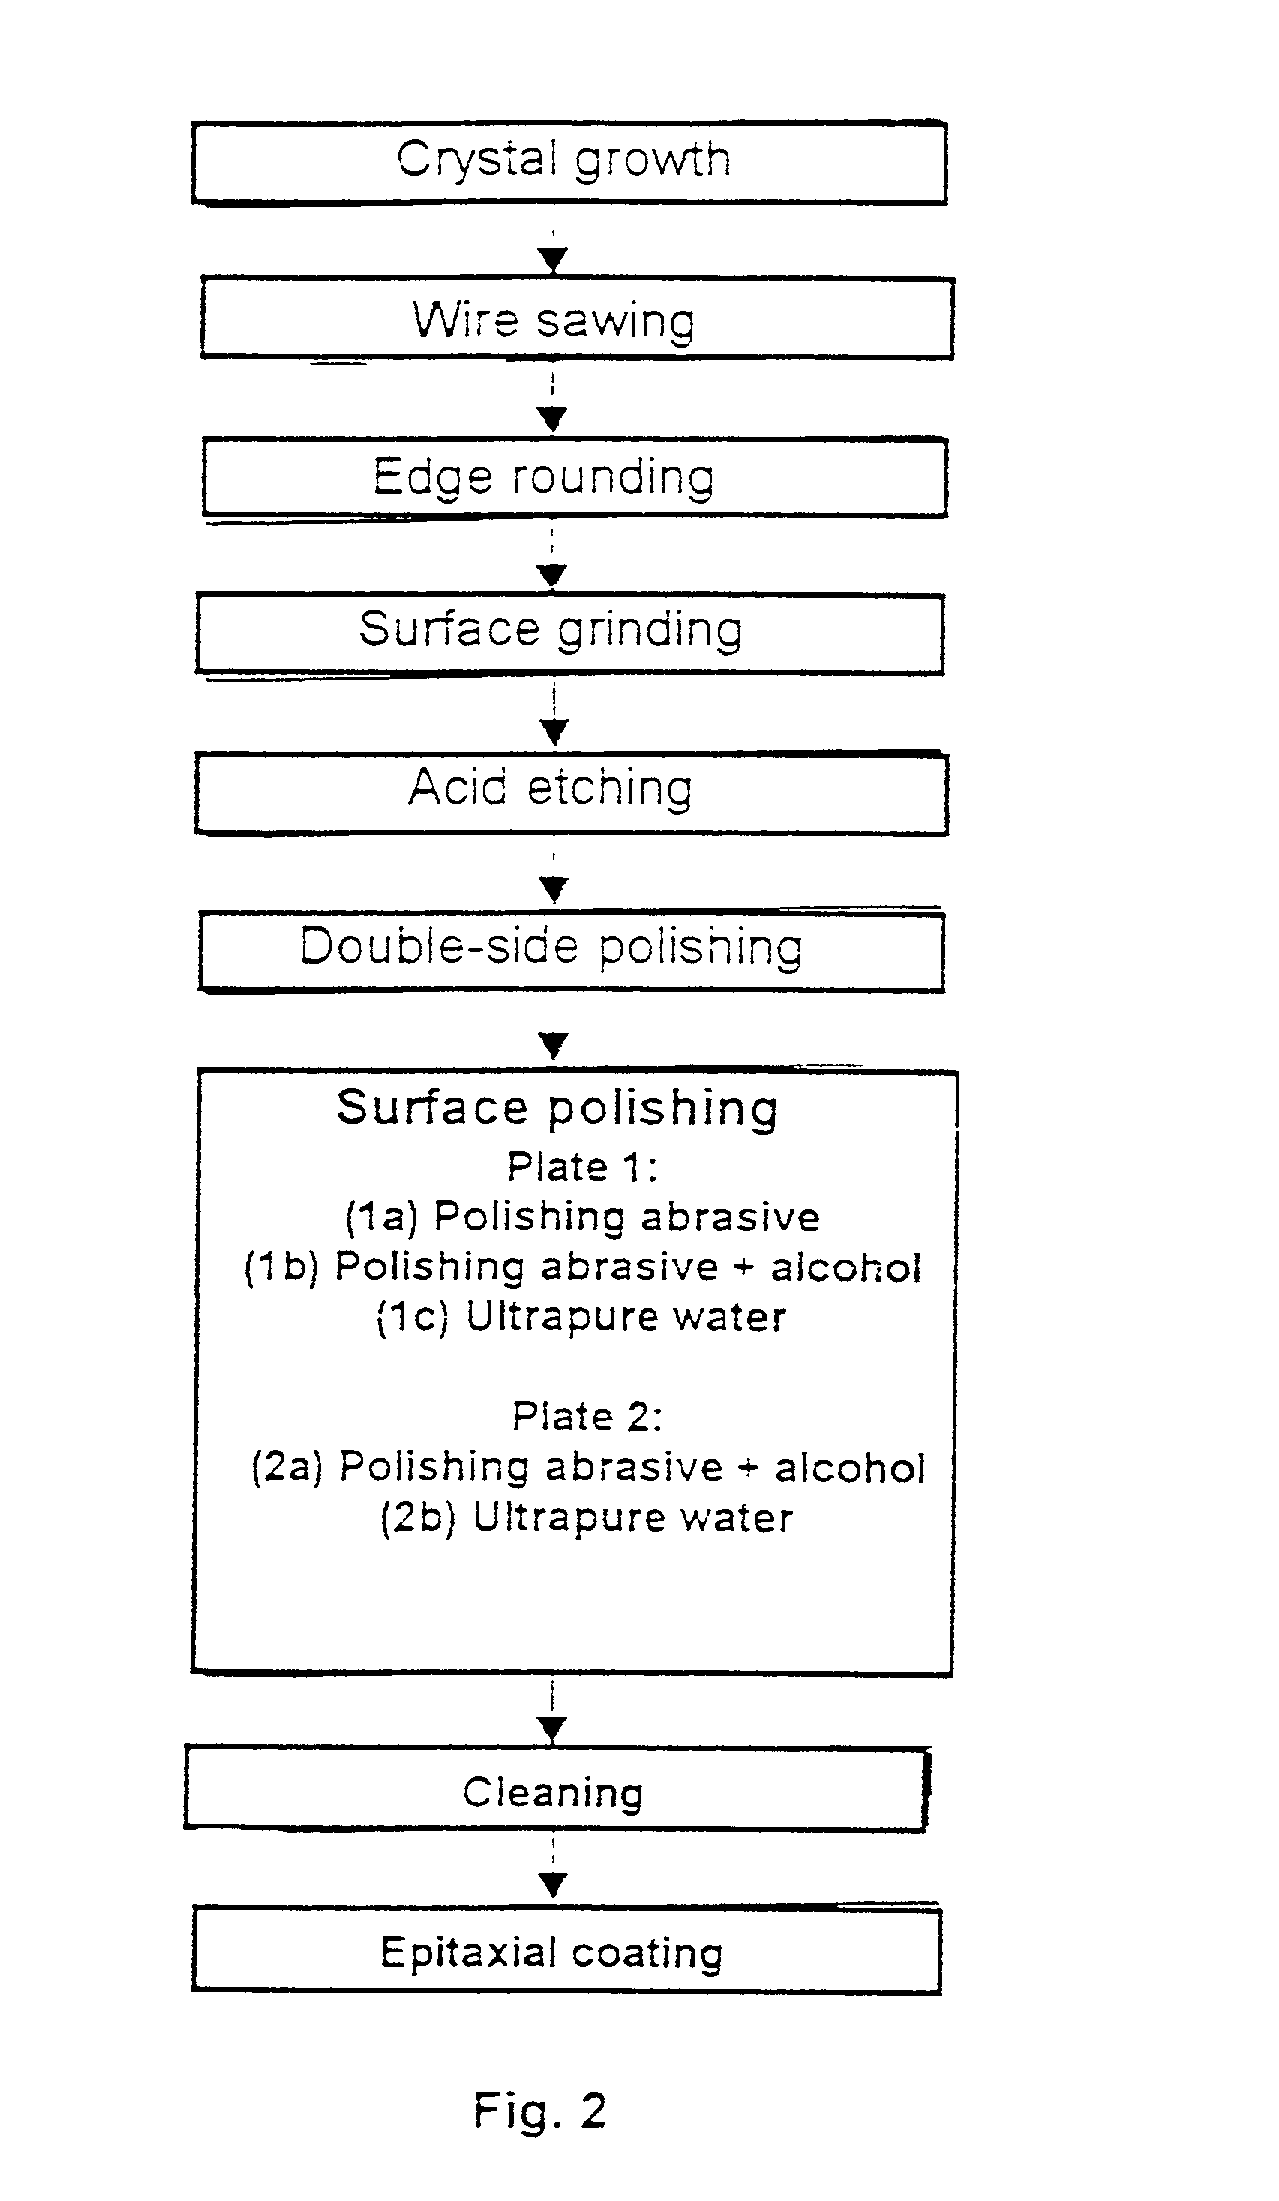 Process for the surface polishing of silicon wafers